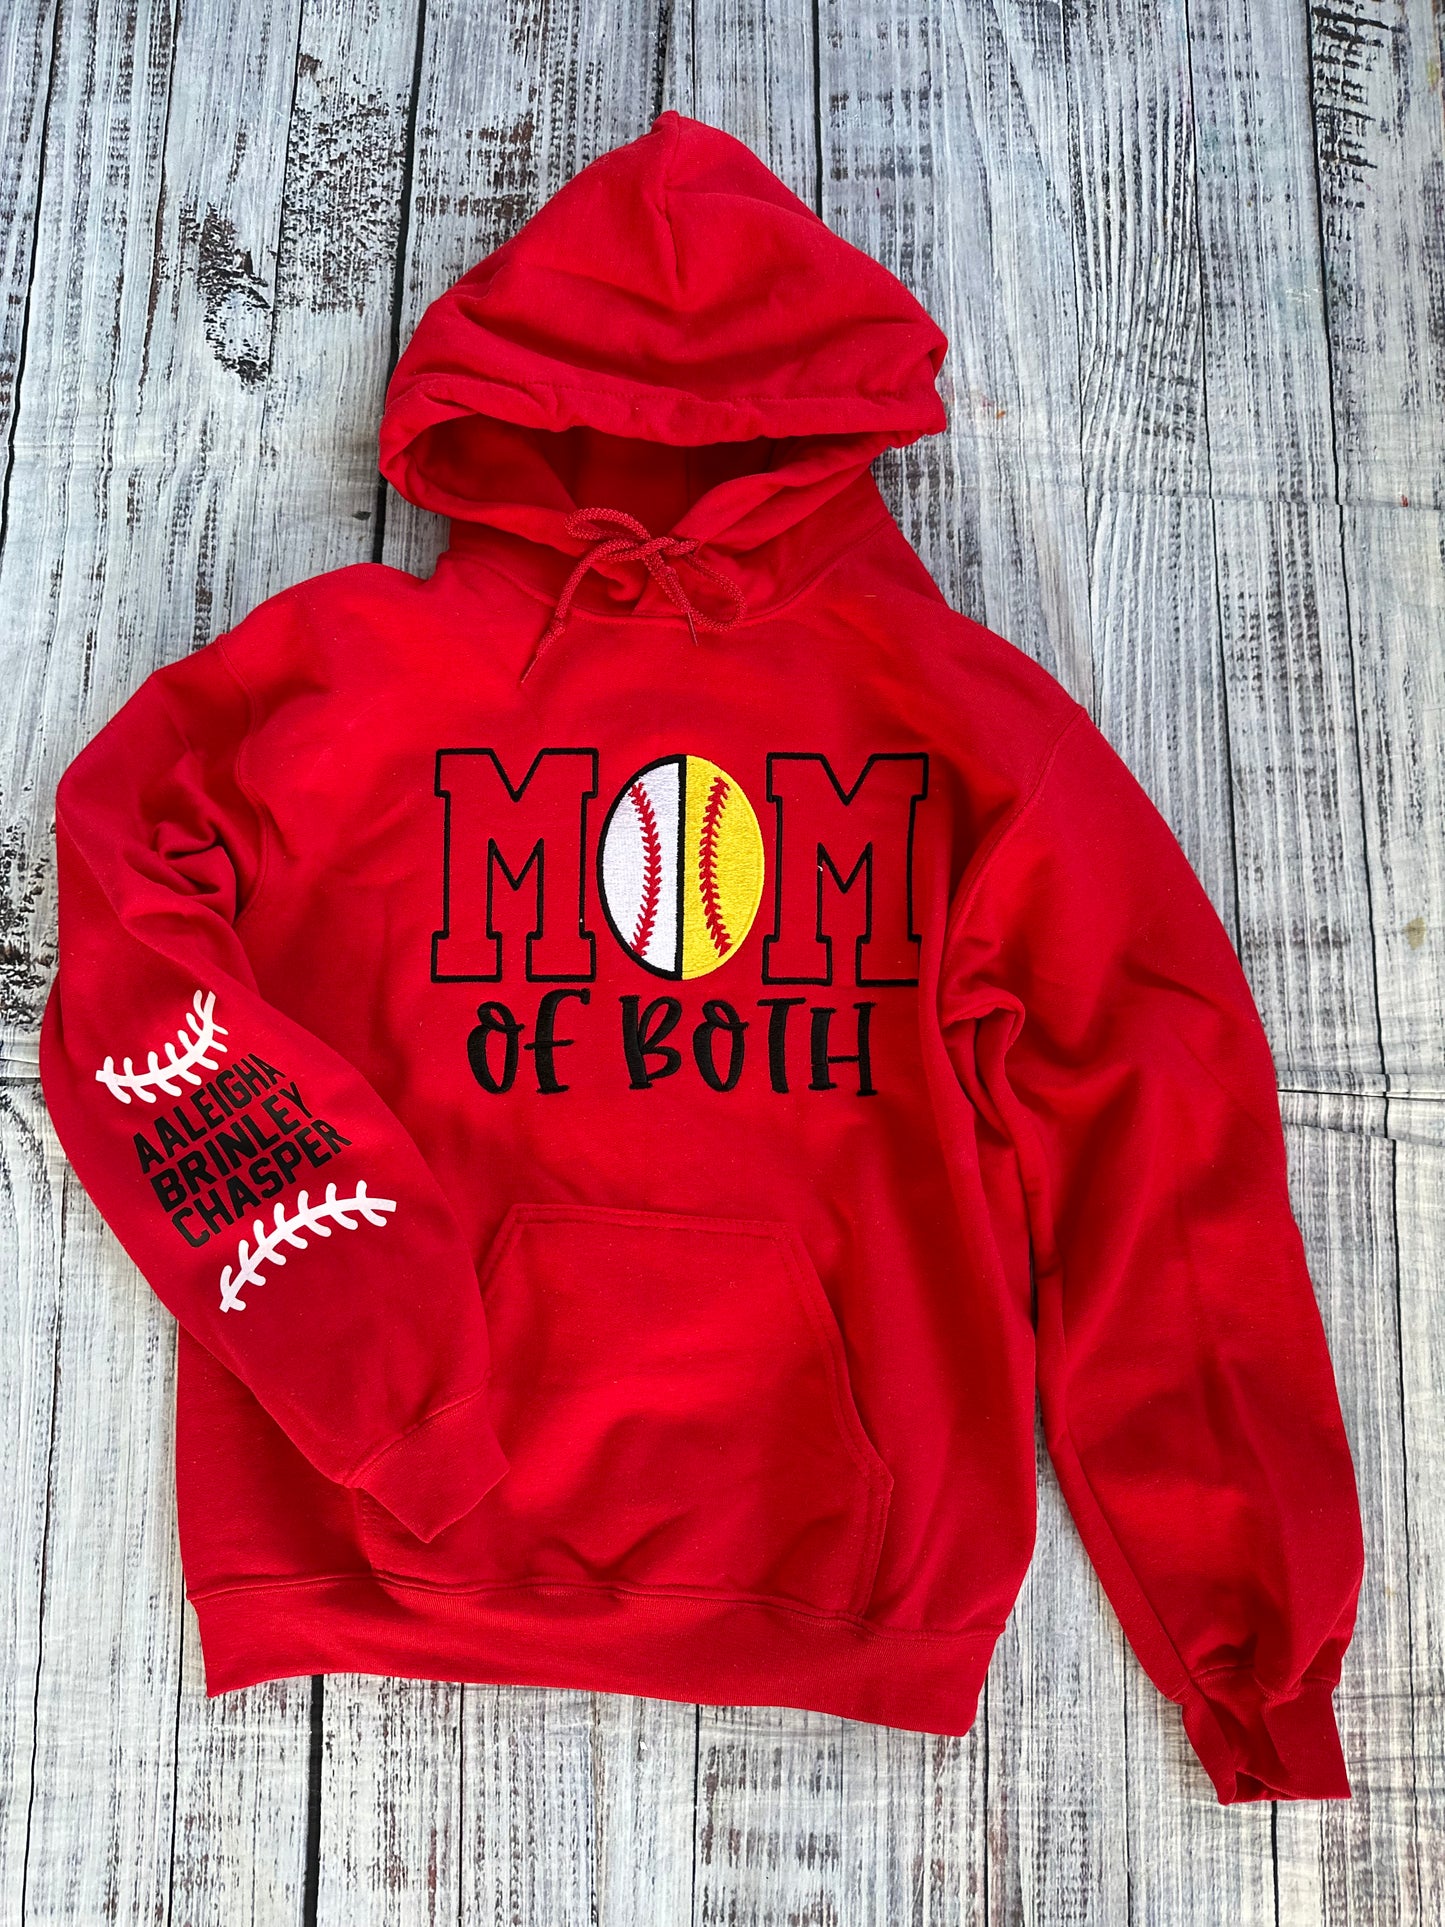 Mom of both embroidered hoodie